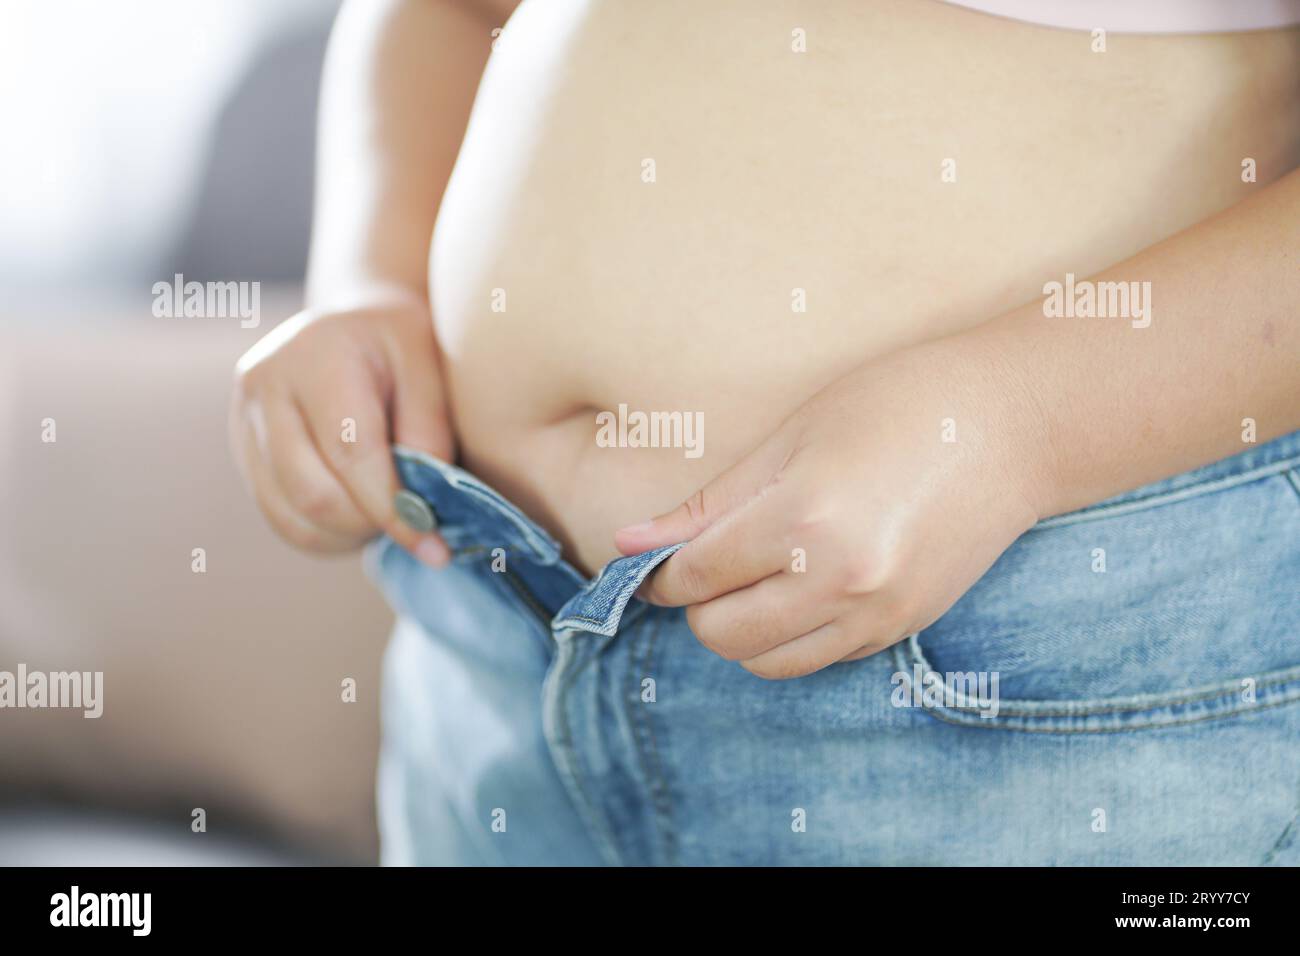 Mothercare. Pregnant woman measuring her belly growth of the baby. Healthy motherhood Body care pregnancy dietÂ concept.Â Stock Photo